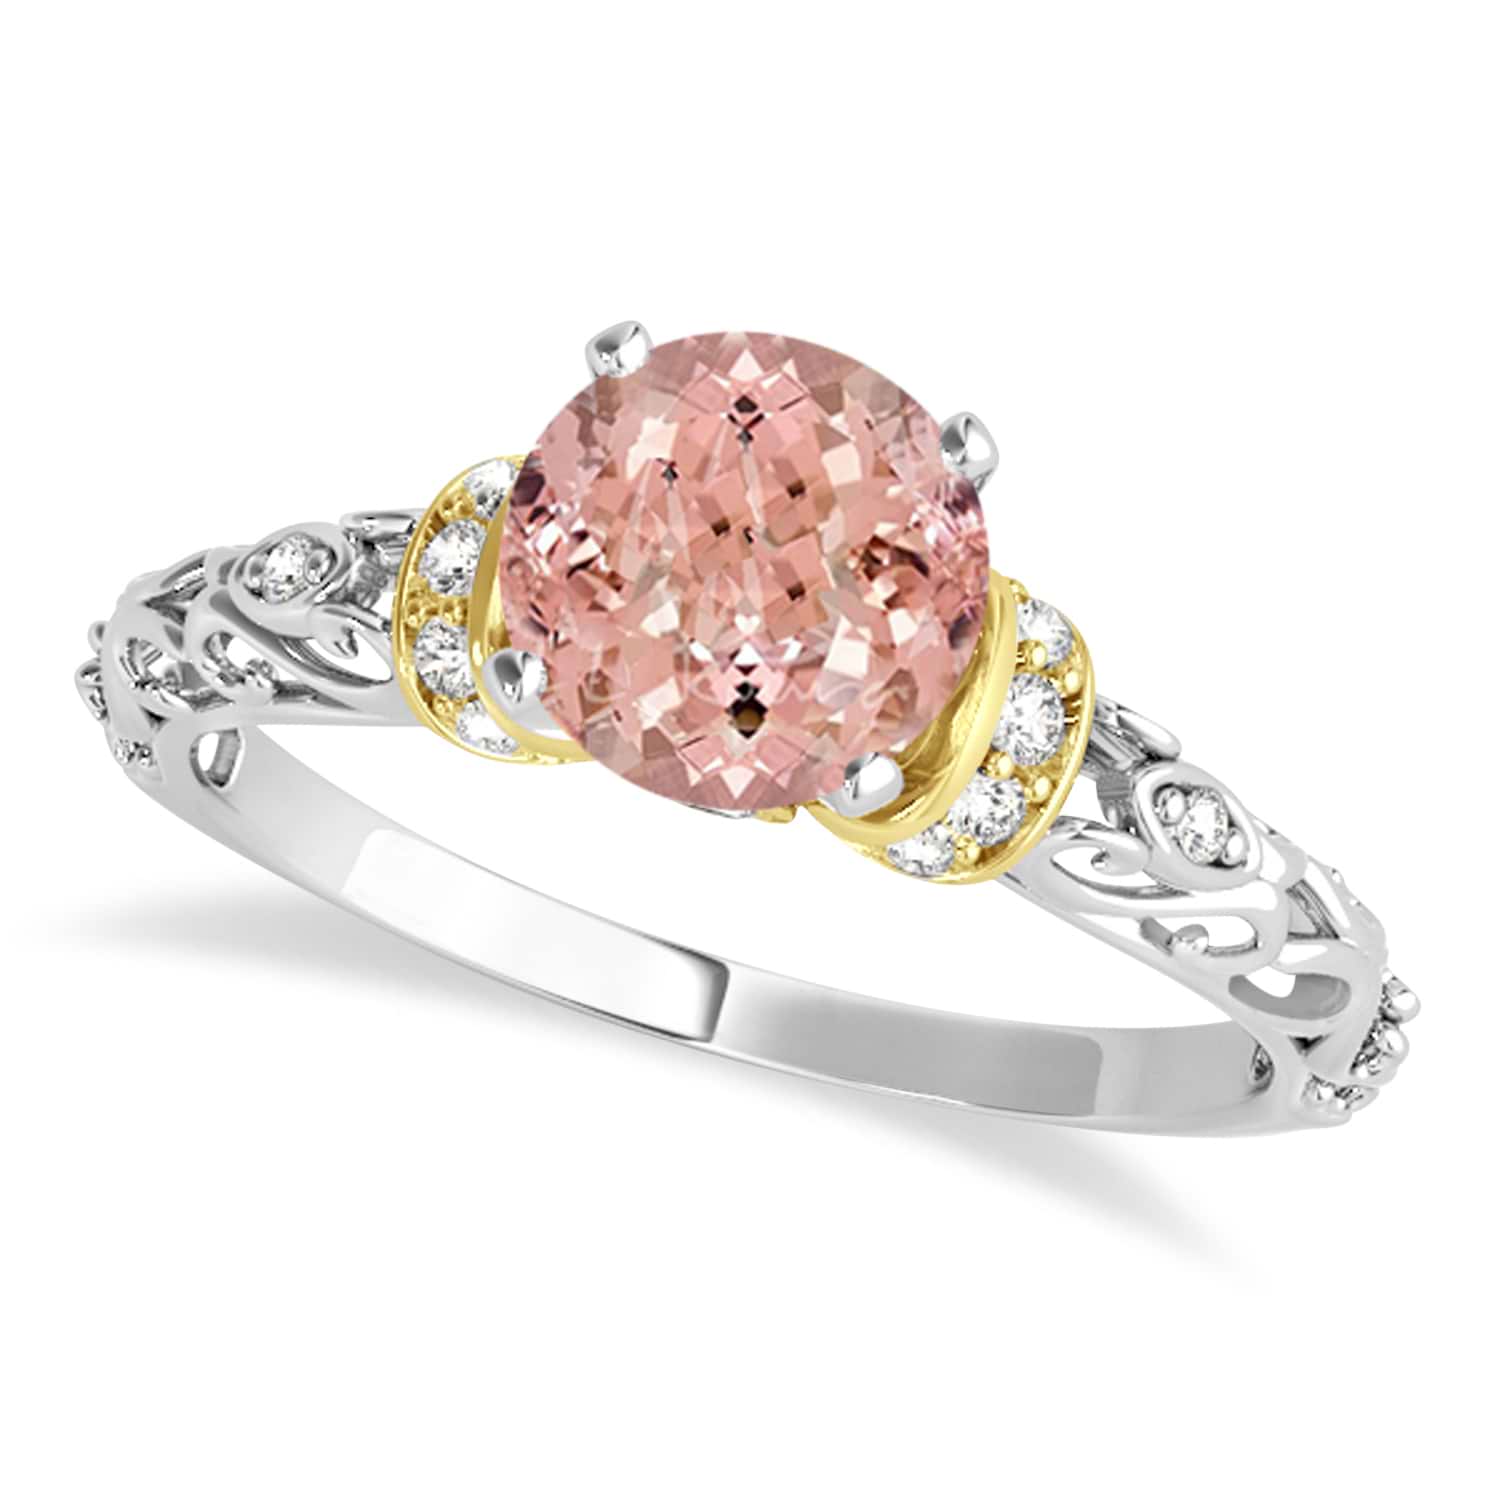 Morganite & Diamond Antique Style Engagement Ring 18k Two-Tone Gold (1.12ct)